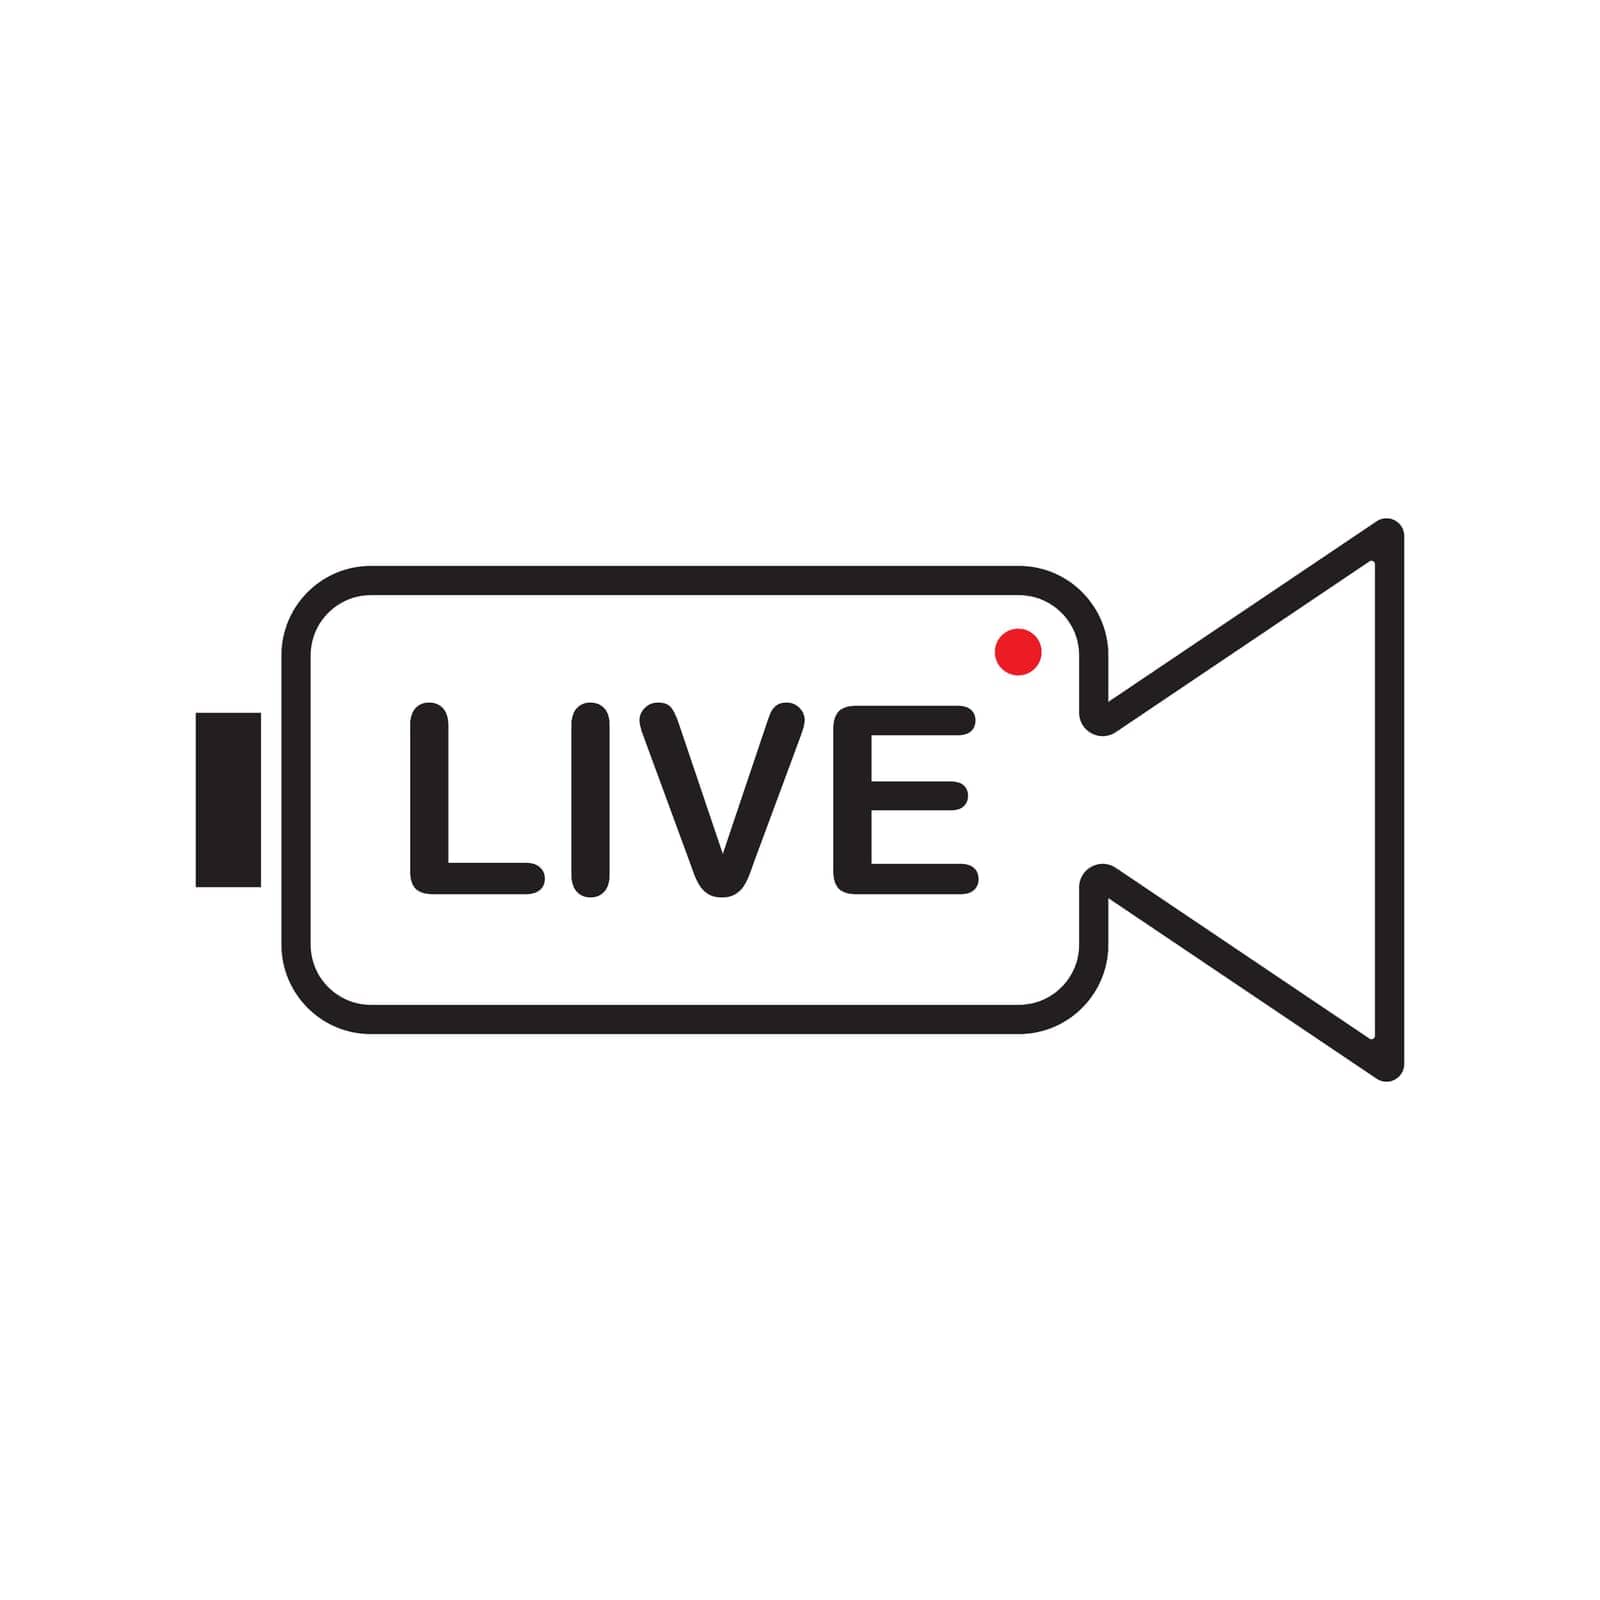 live icon by rnking